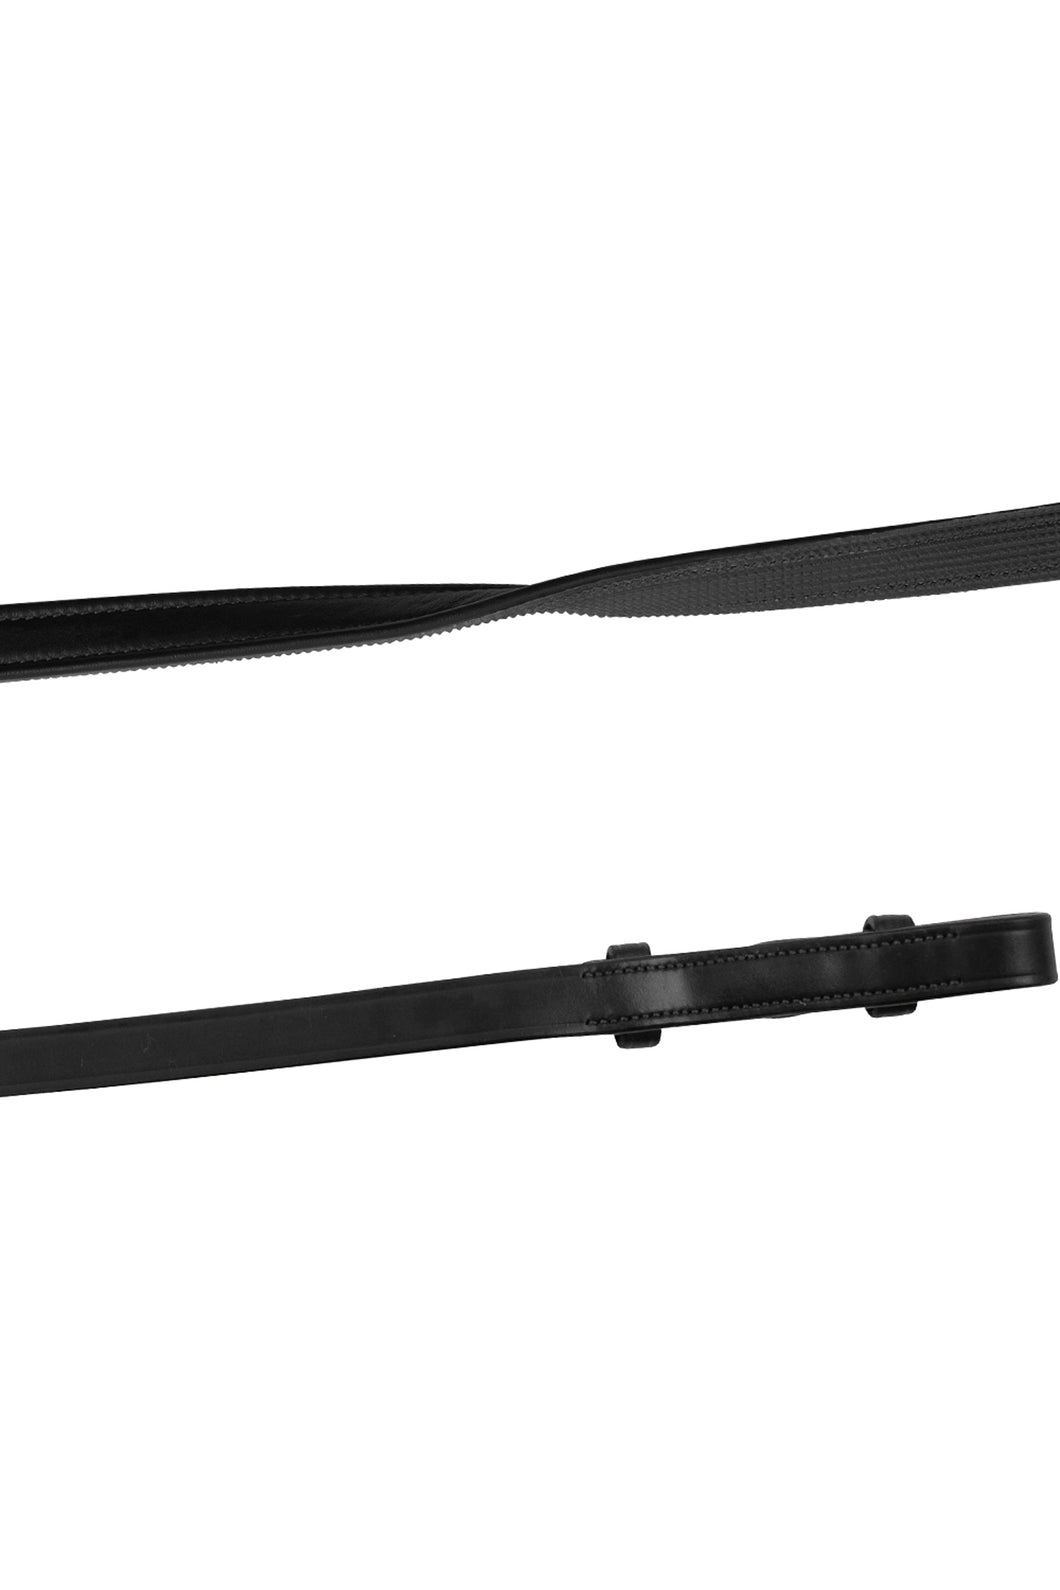 Smooth Leather/Rubber Reins - Black with French Hooks